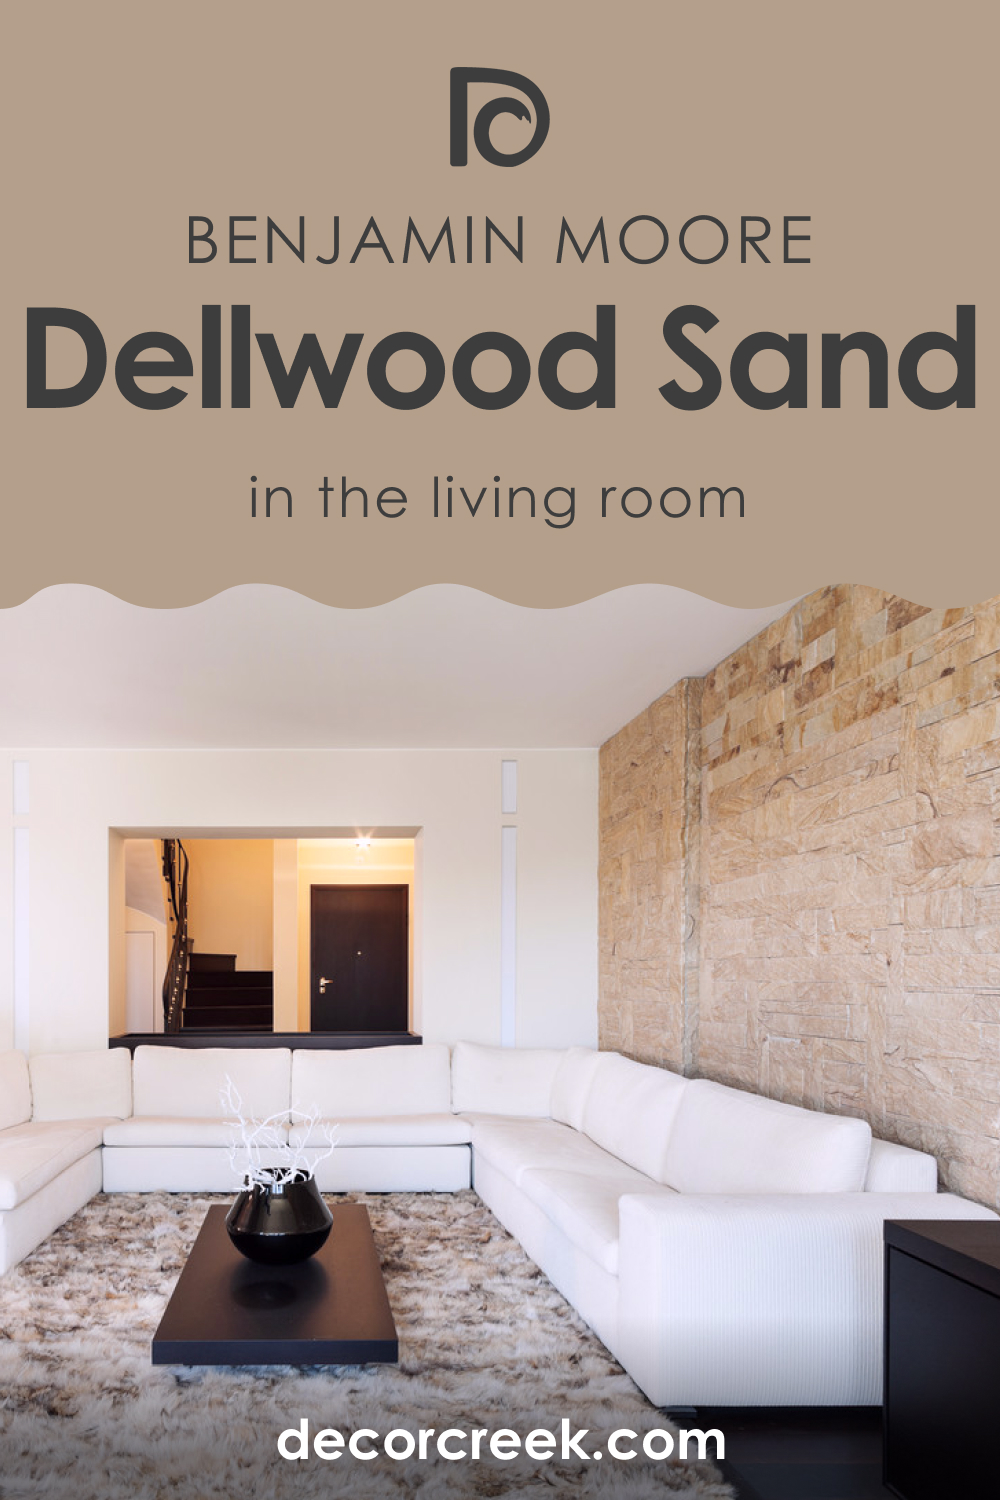 Dellwood Sand 1019 in the Living Room